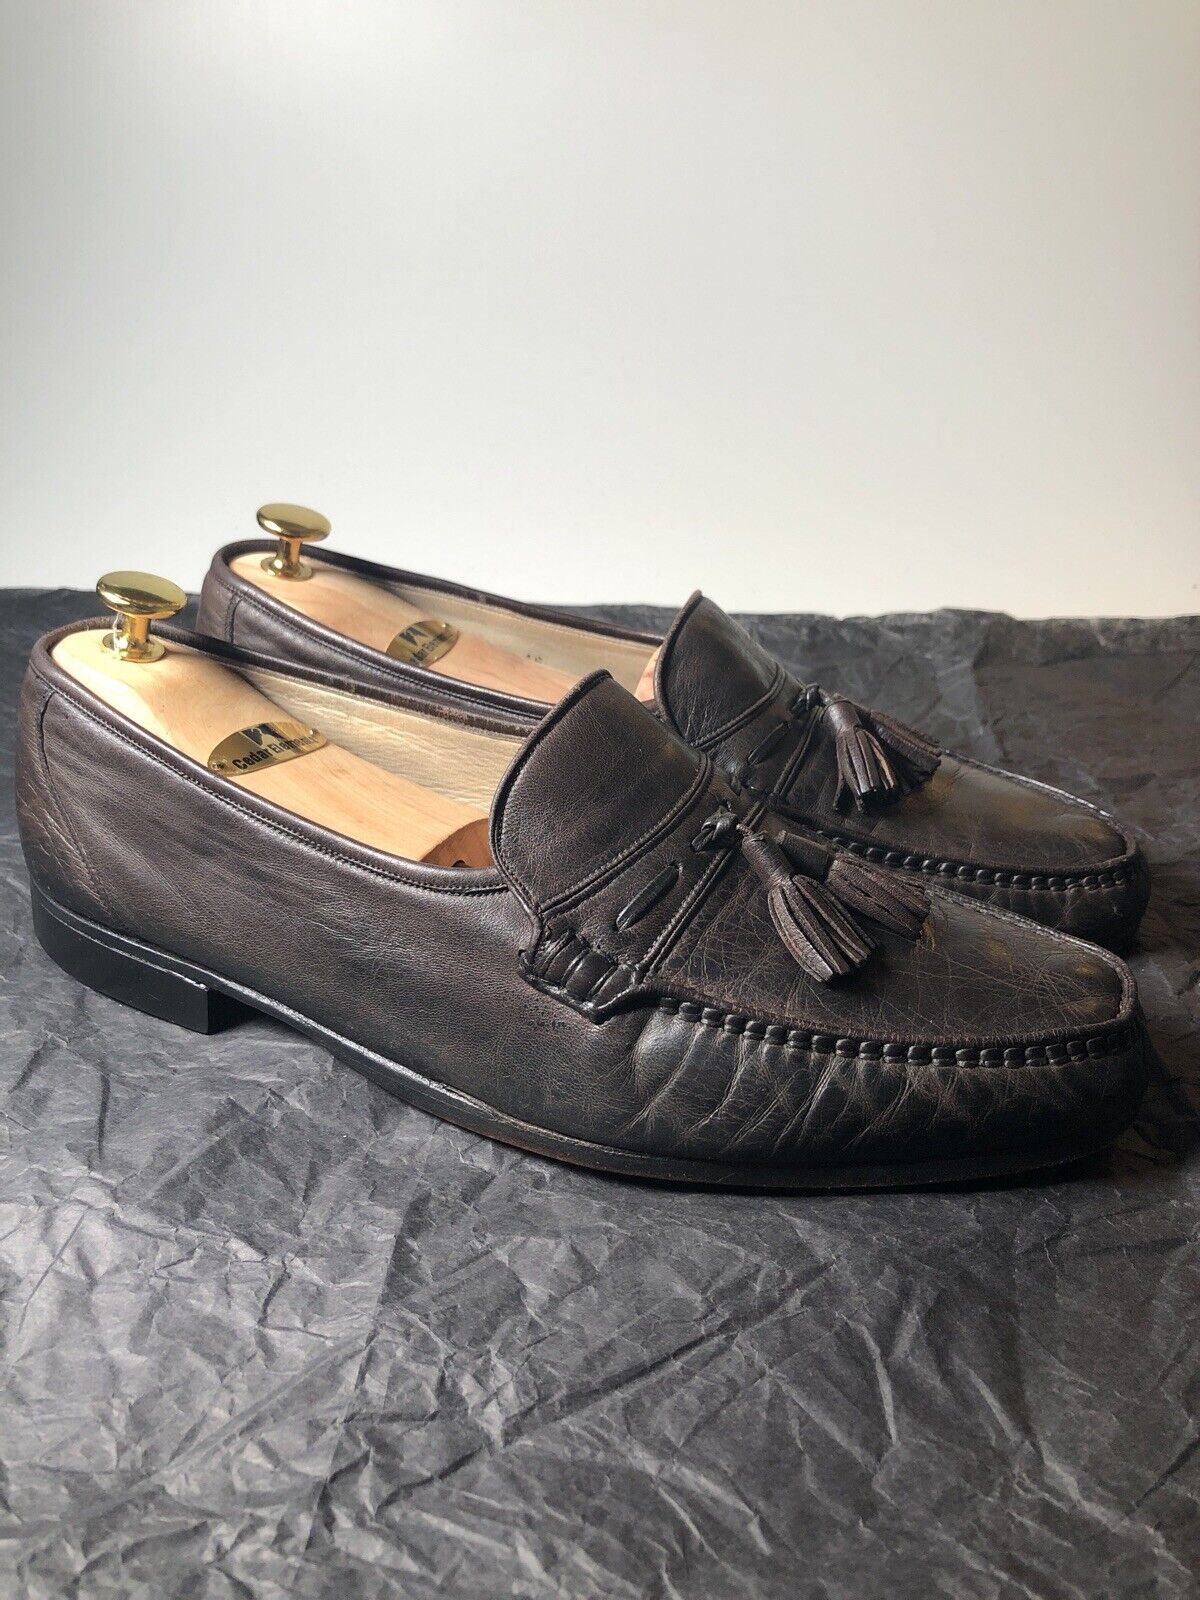 Bally $595 Brown Leather Re-Soled Tassel Loafers Mens Size 11 M